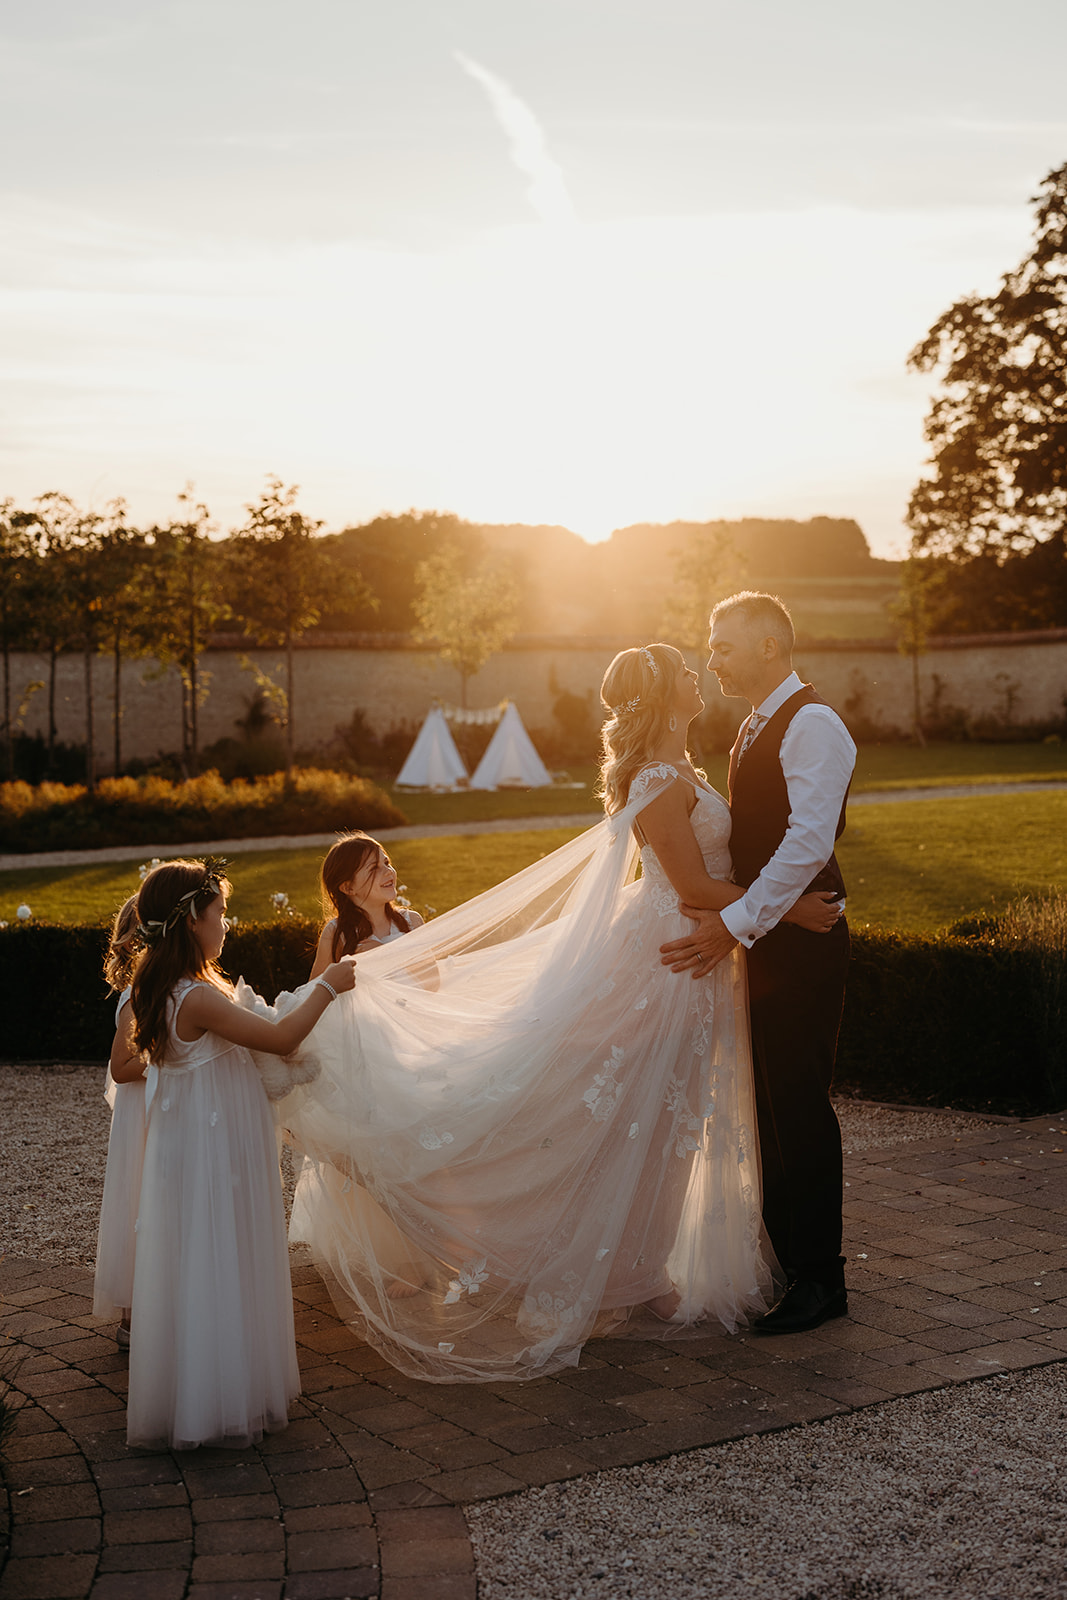 sunset flow as flower girls help bride with dress as she stands with groom